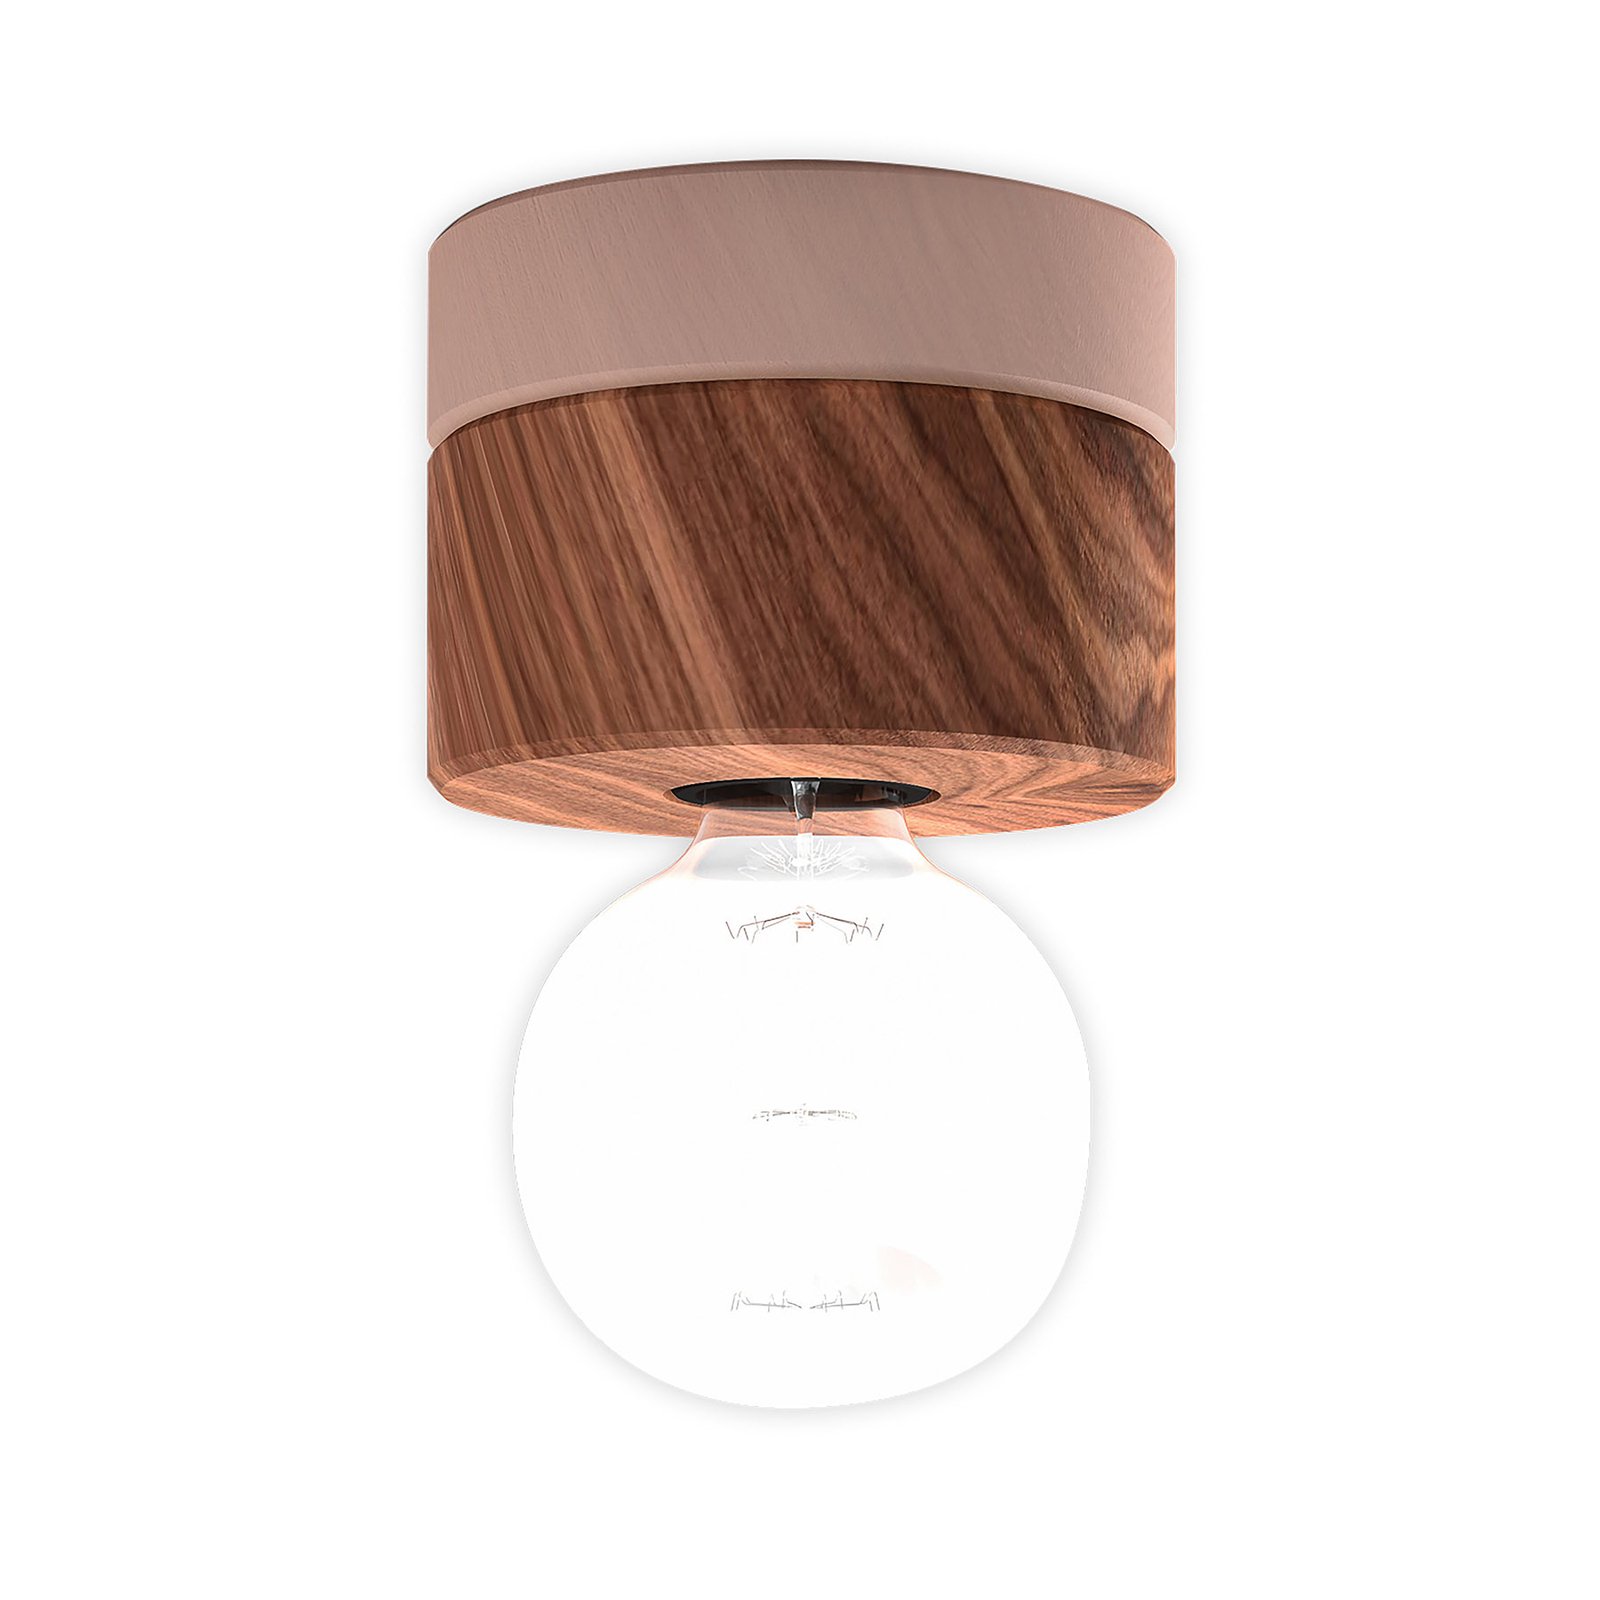 ALMUT 0239 ceiling lamp, sustainable, walnut/pink